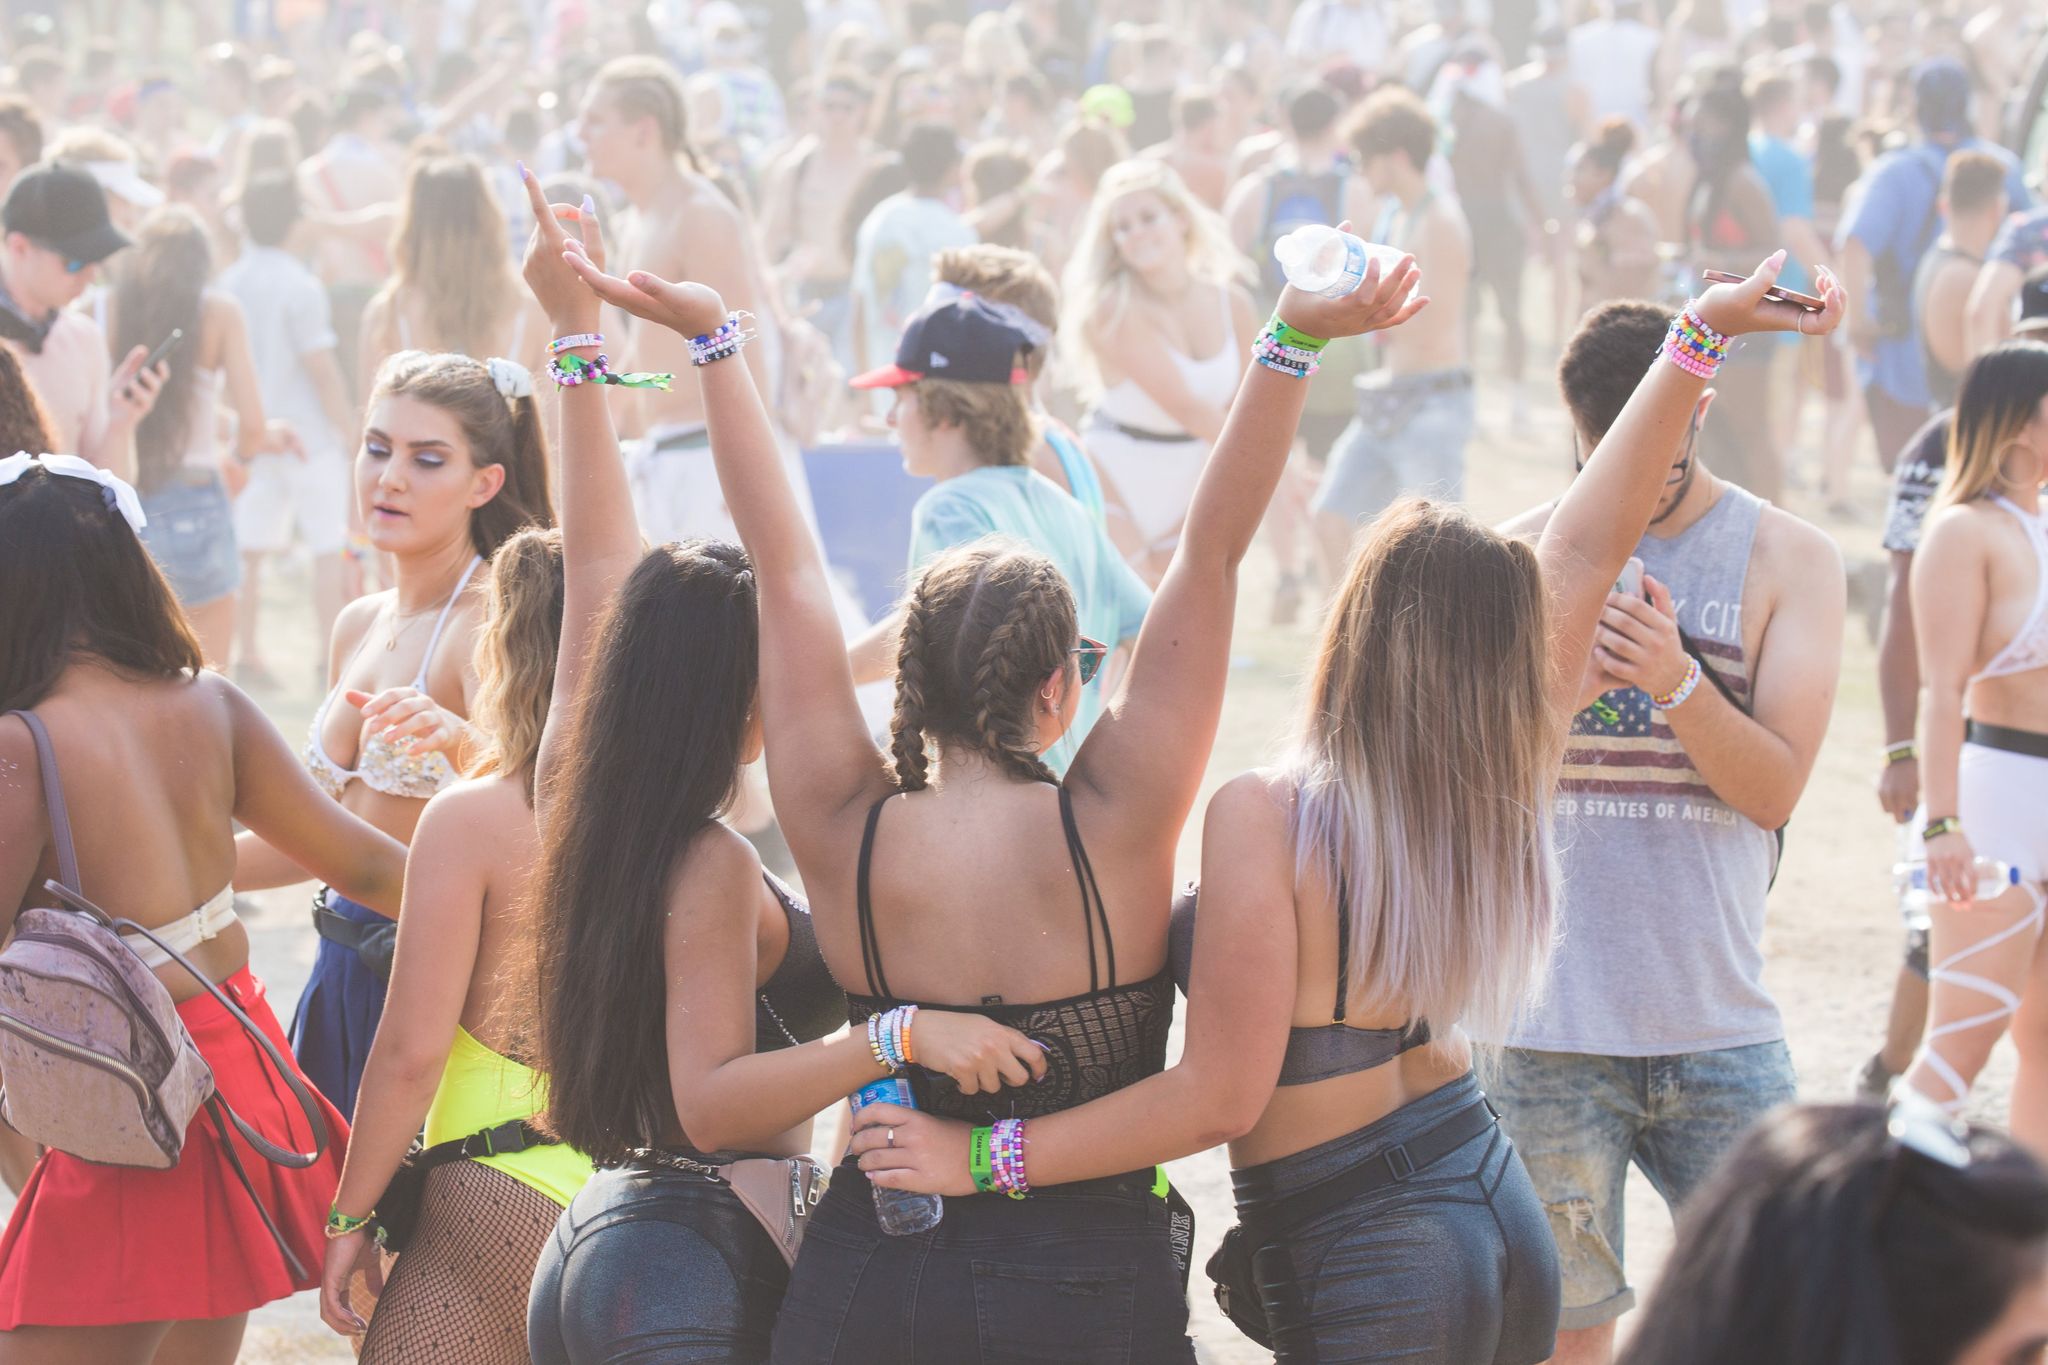 three friends posing with their arms in the air at a music festival